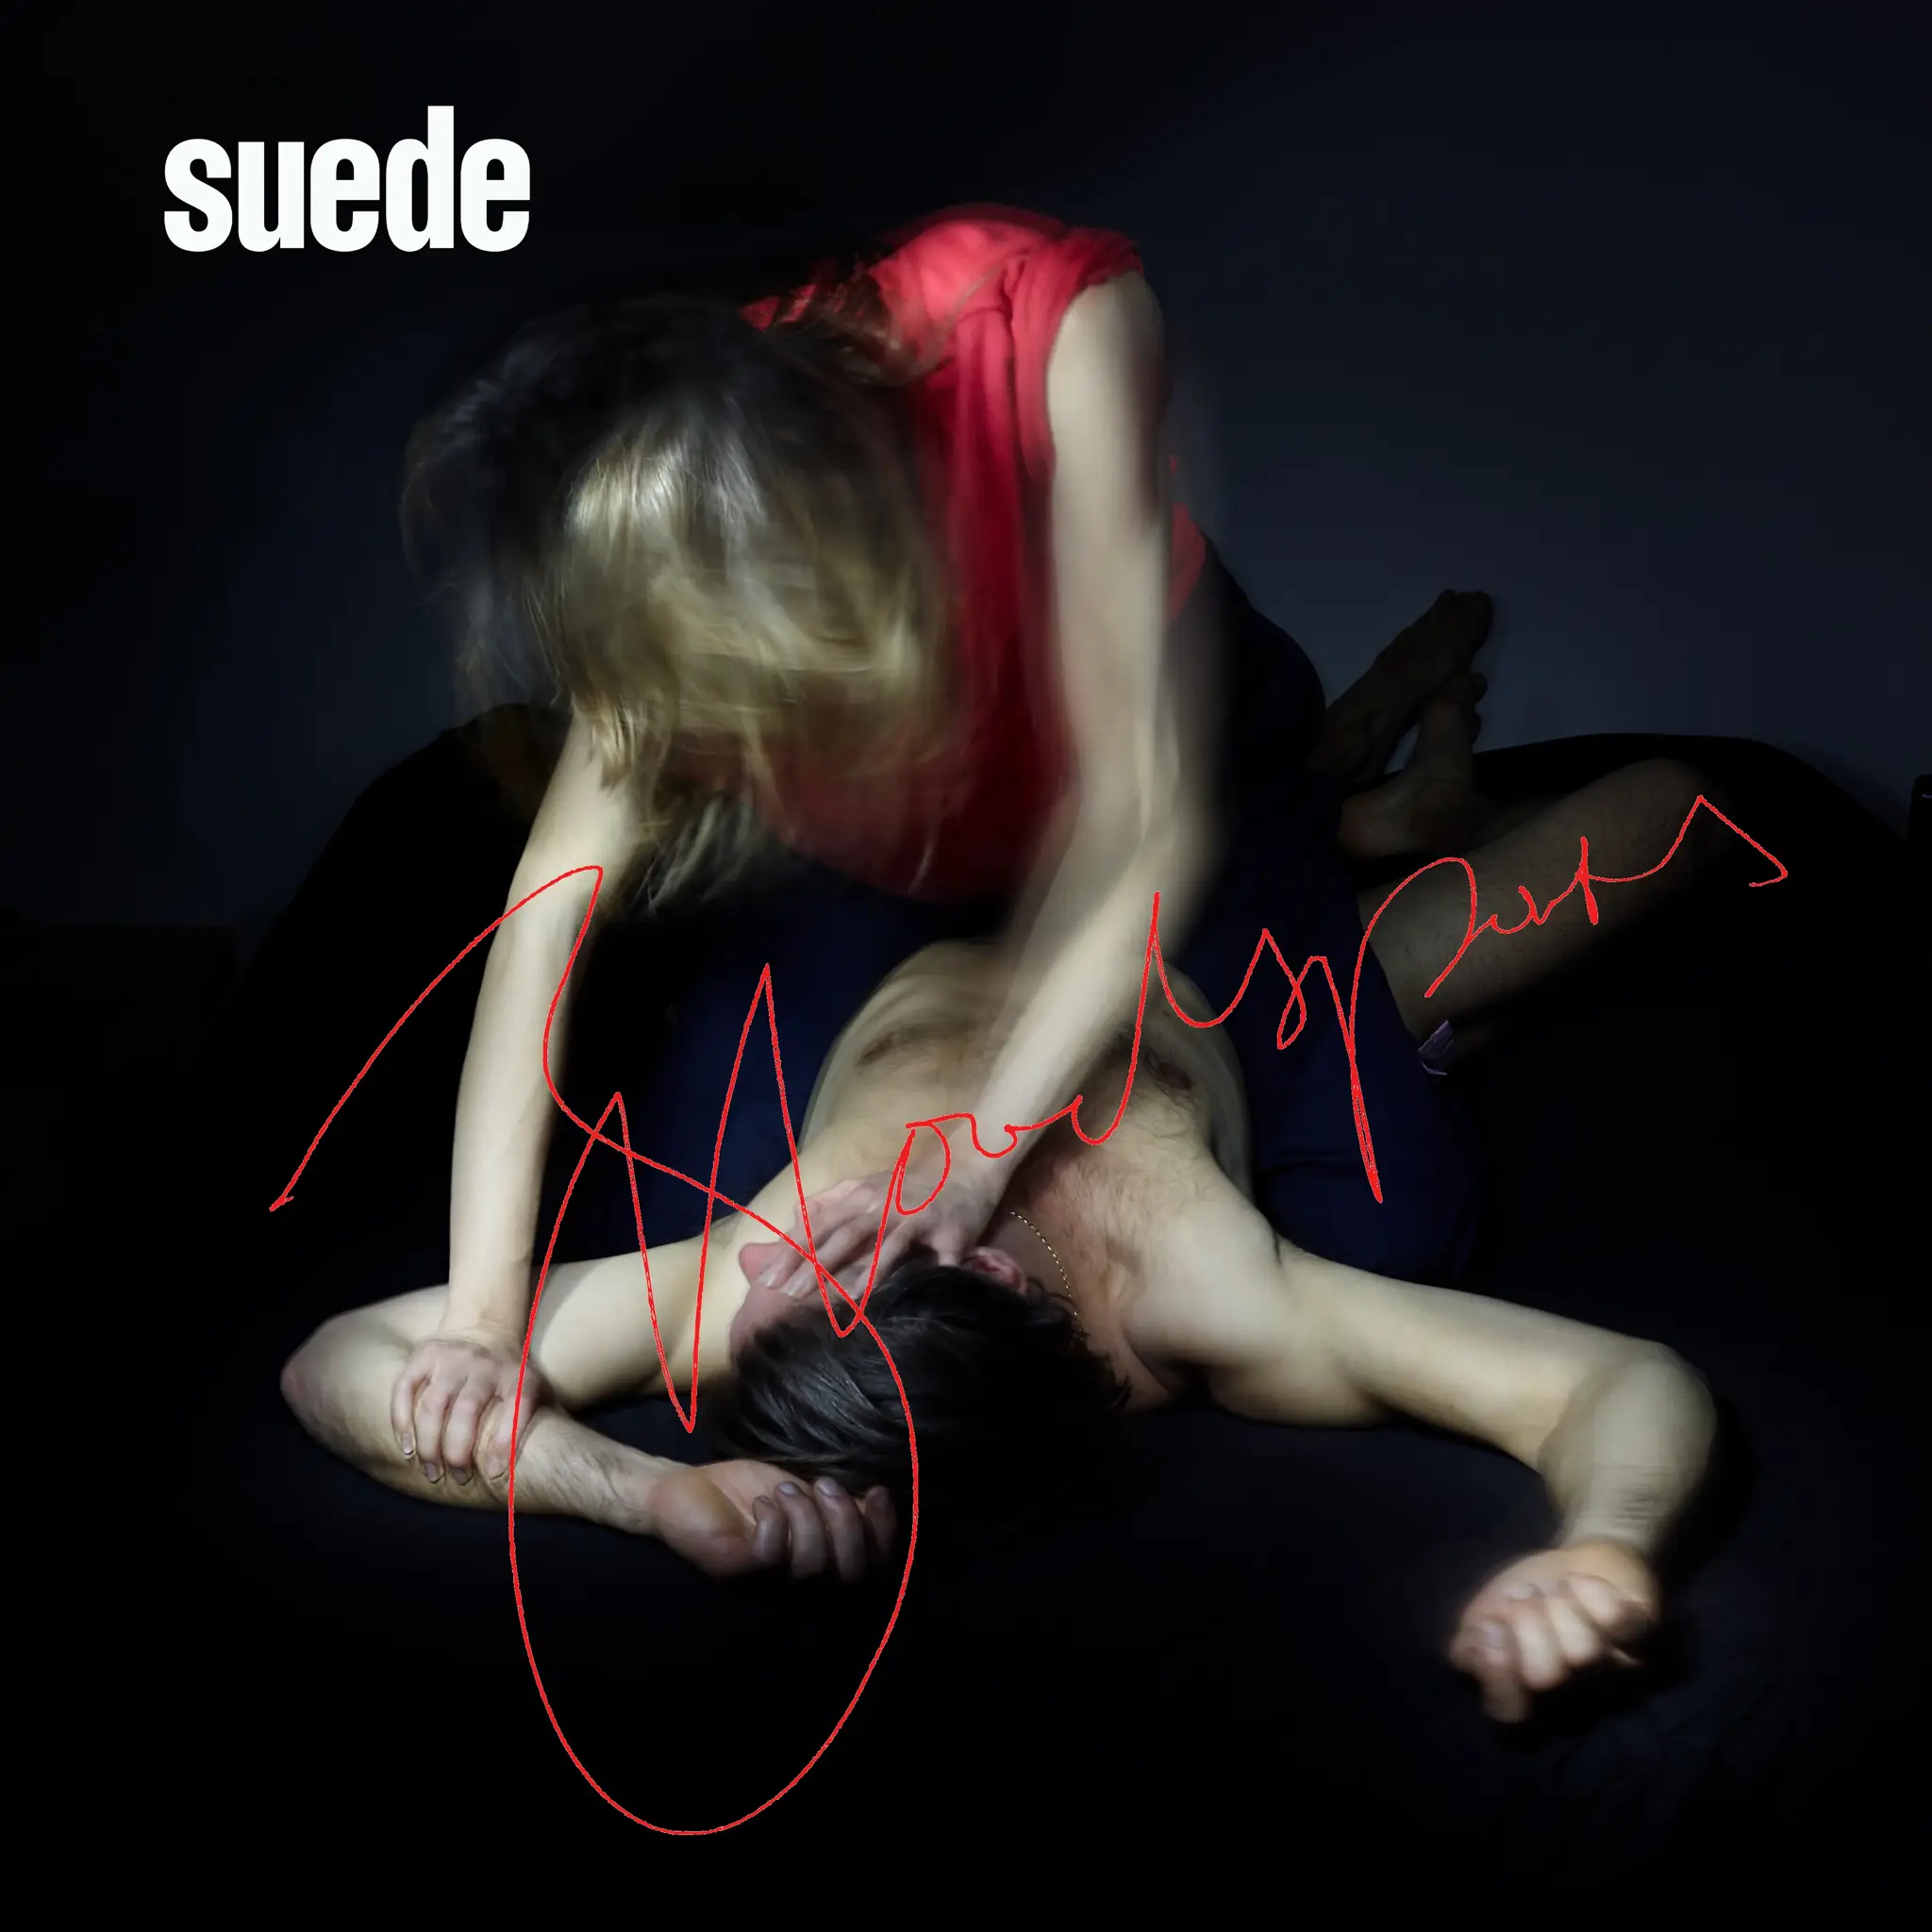 <strong>Suede - Bloodsports (10th Anniversary Edition)</strong> (Vinyl LP - black)